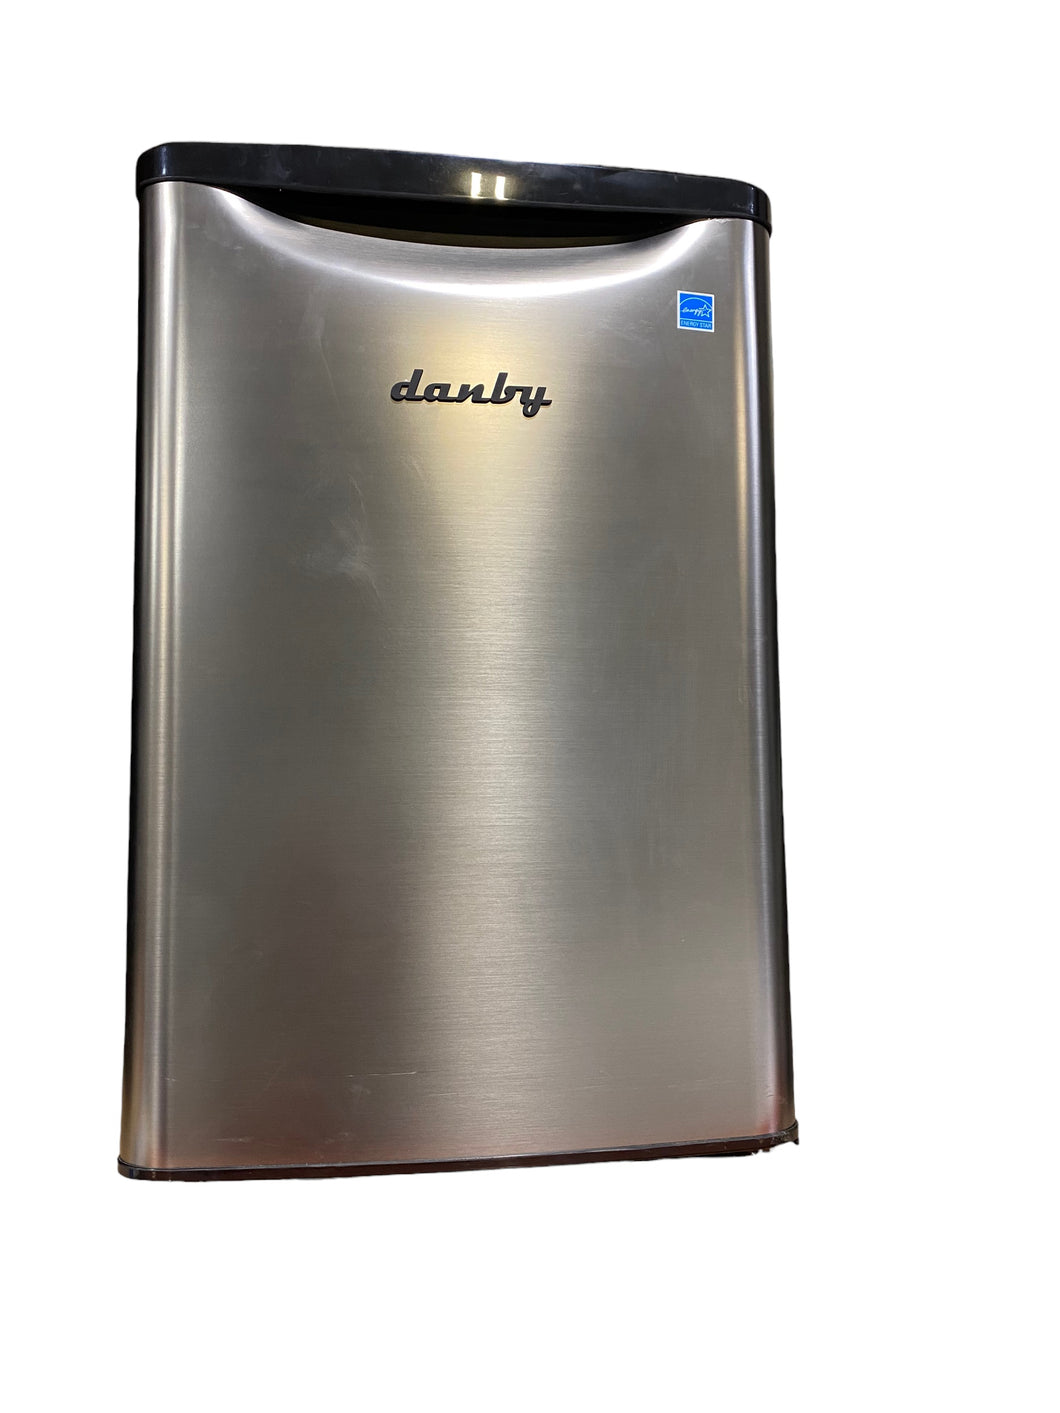 Danby 4.4 cu. ft. Compact All Refrigerator in Silver DAR044A6BSLDB-SD STORE PICKUP ONLY - FreemanLiquidators - [product_description]